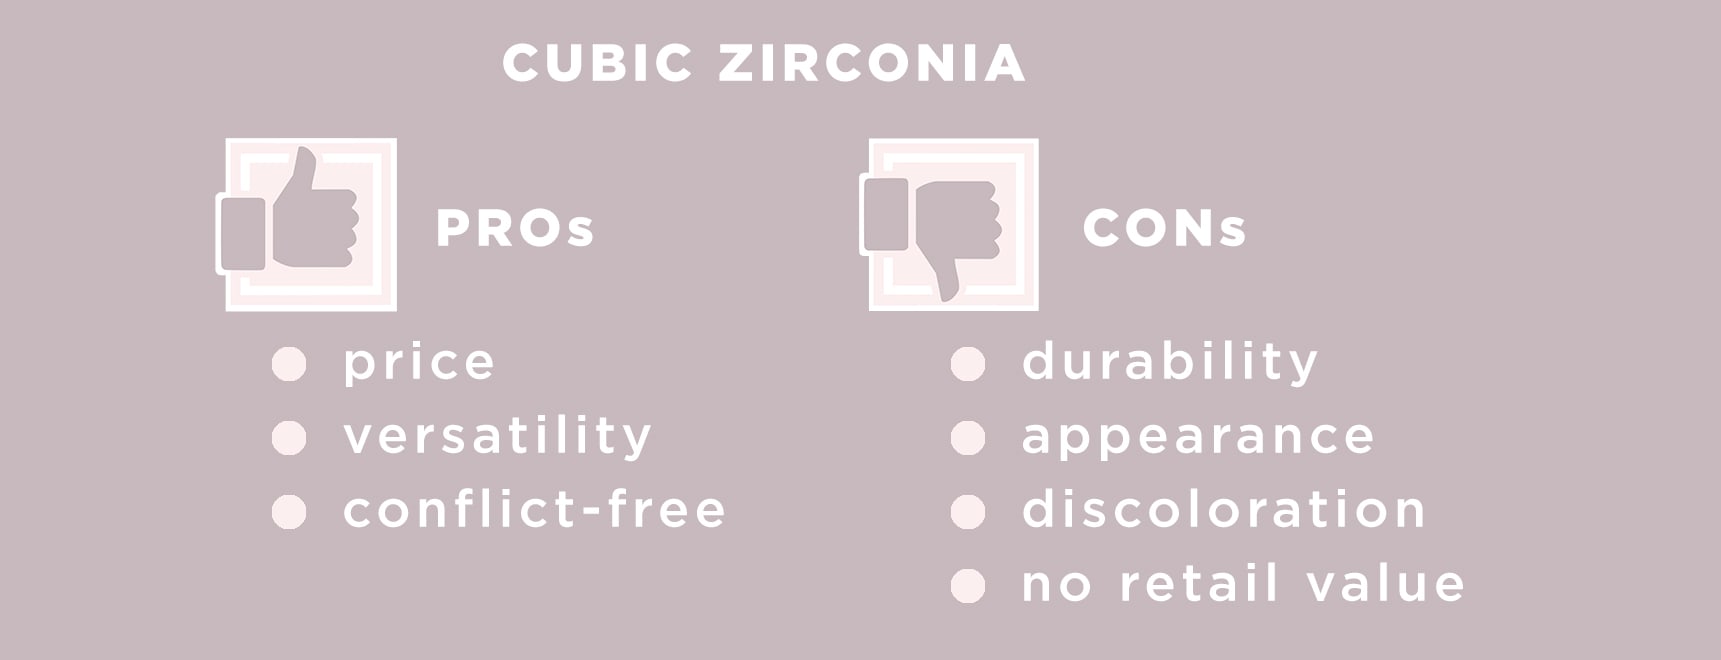 Cubic Zirconia Pros and Cons